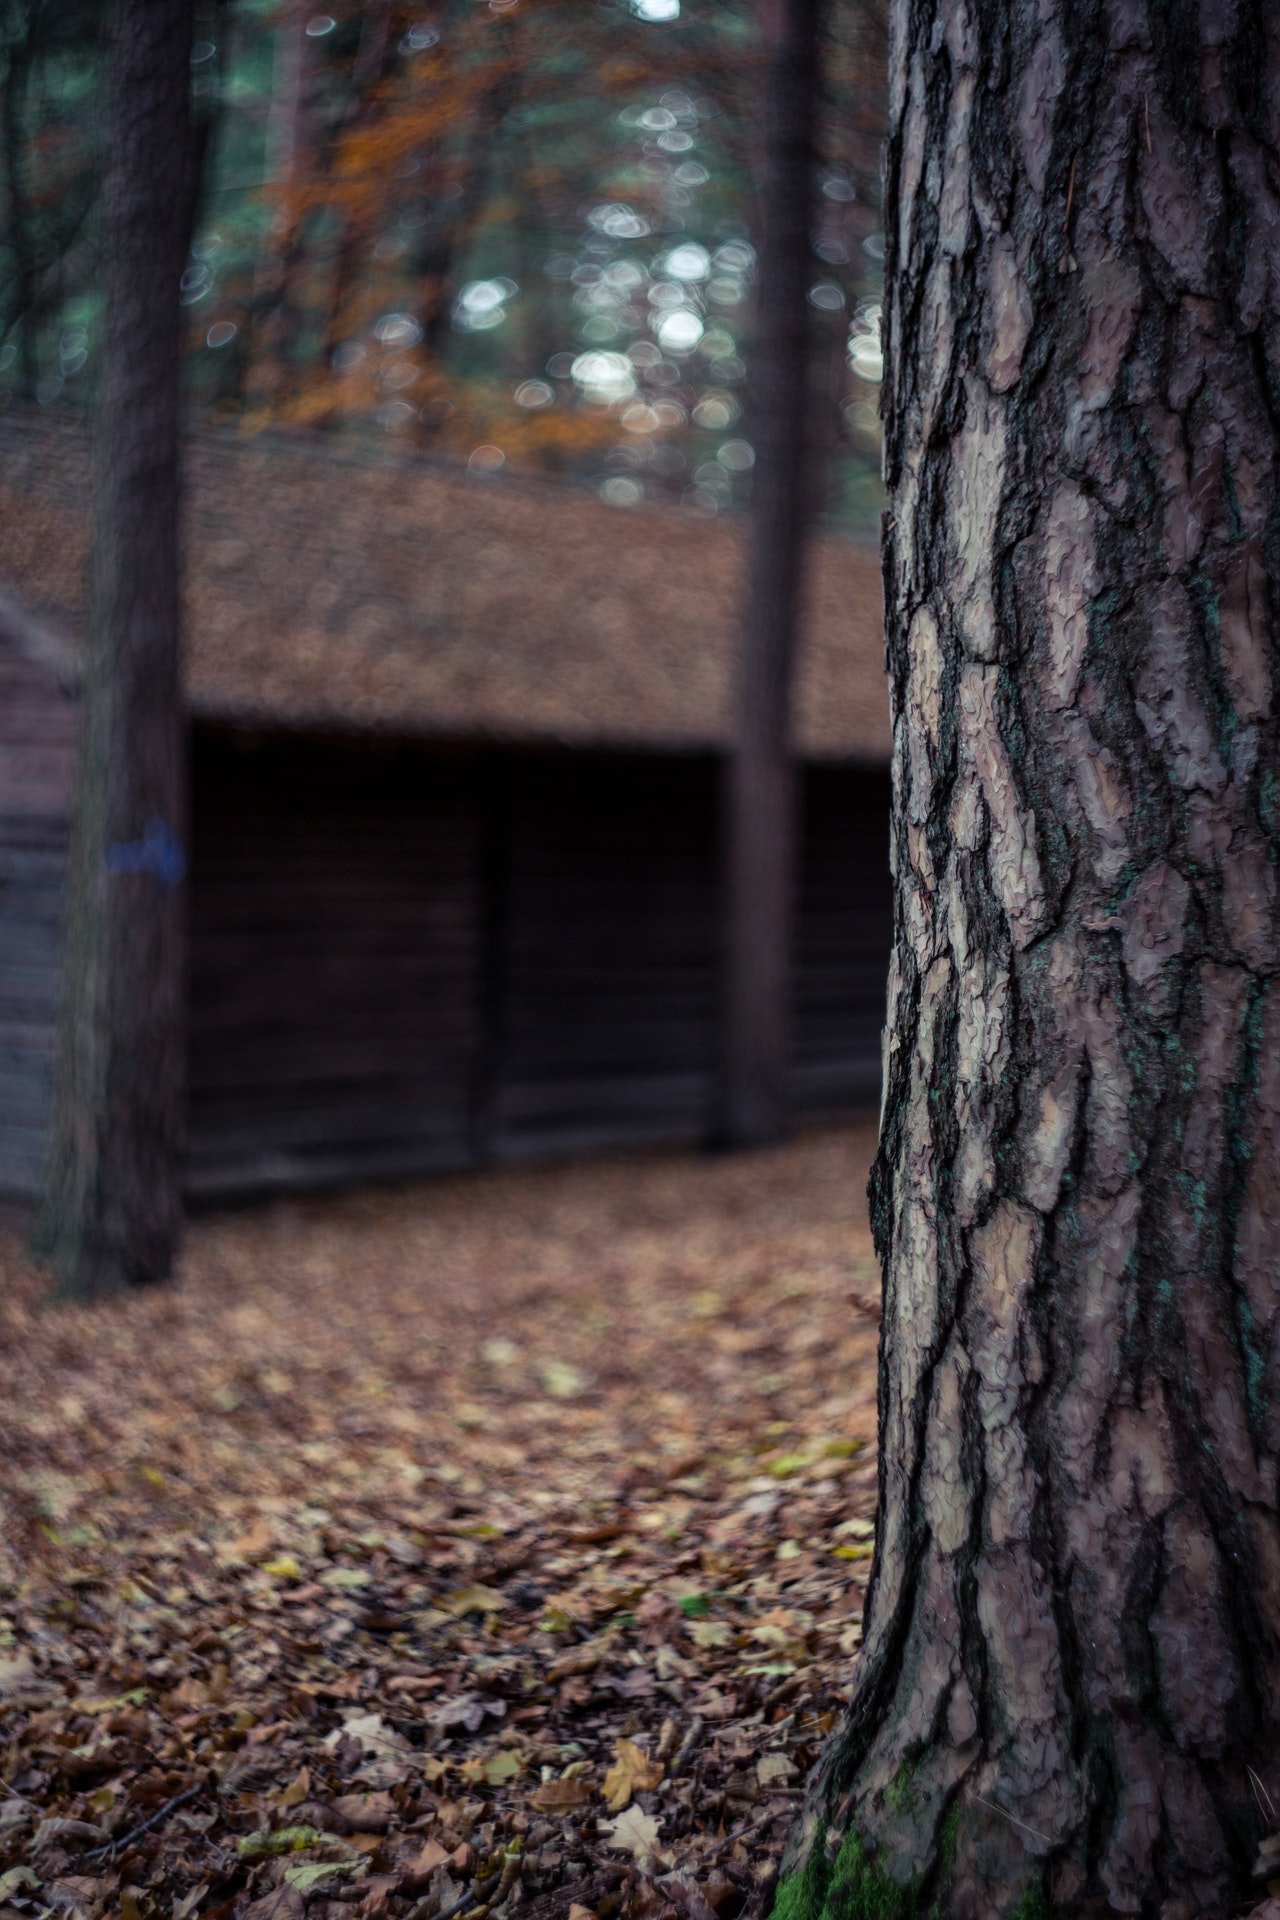 They were about to start digging behind the cabin. | Source: Pexels